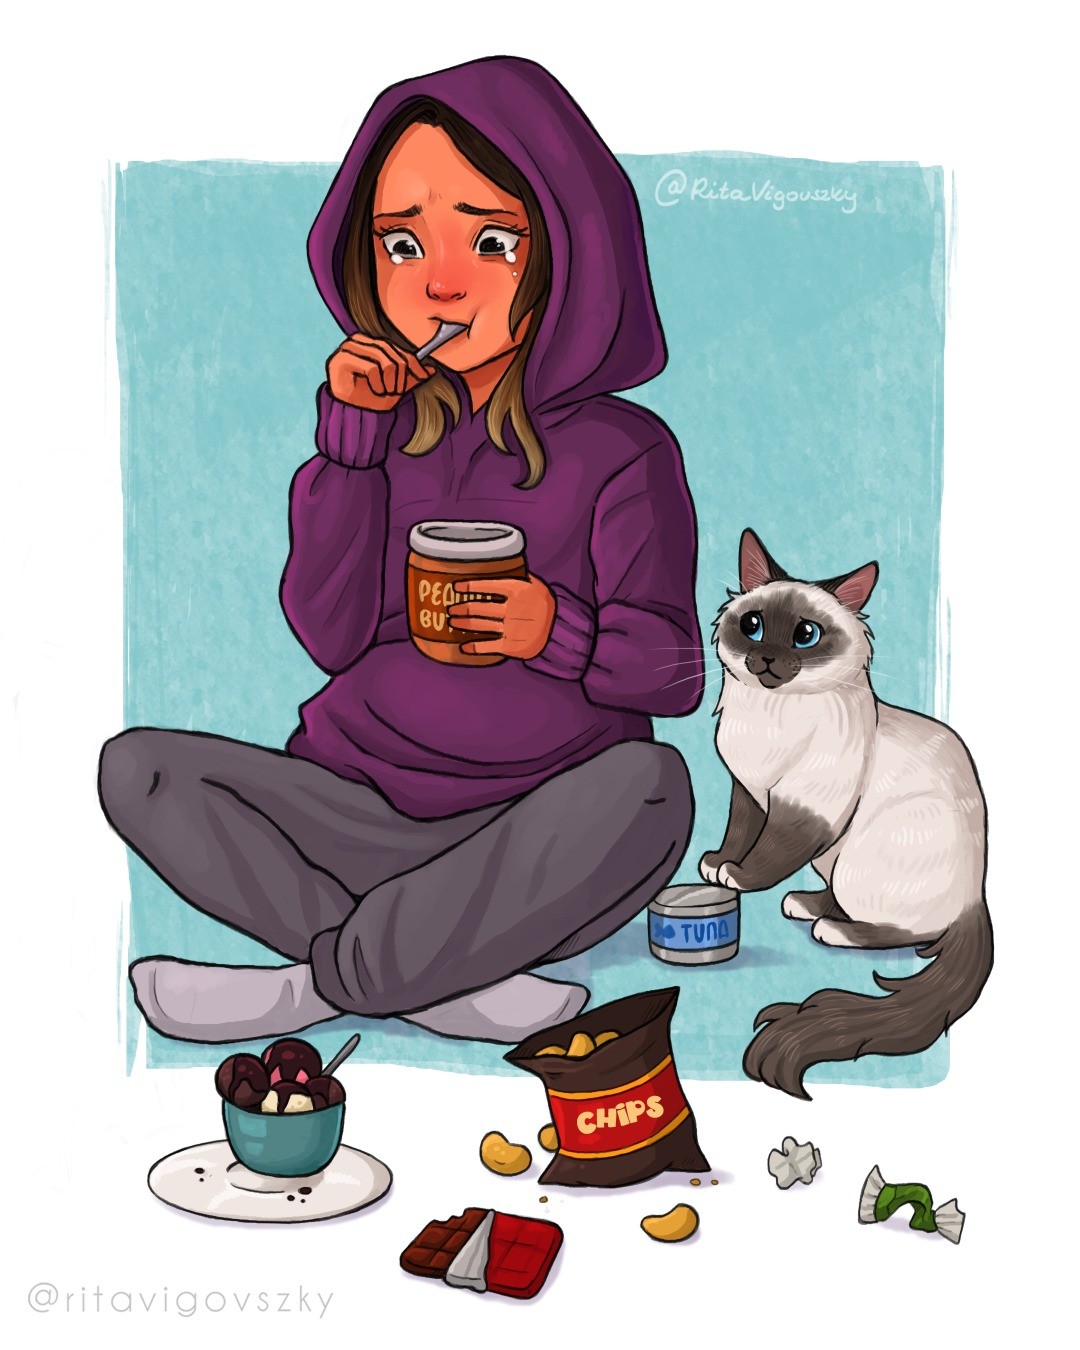 Artist Illustrates What Everyday Life With Her Cat Is Like